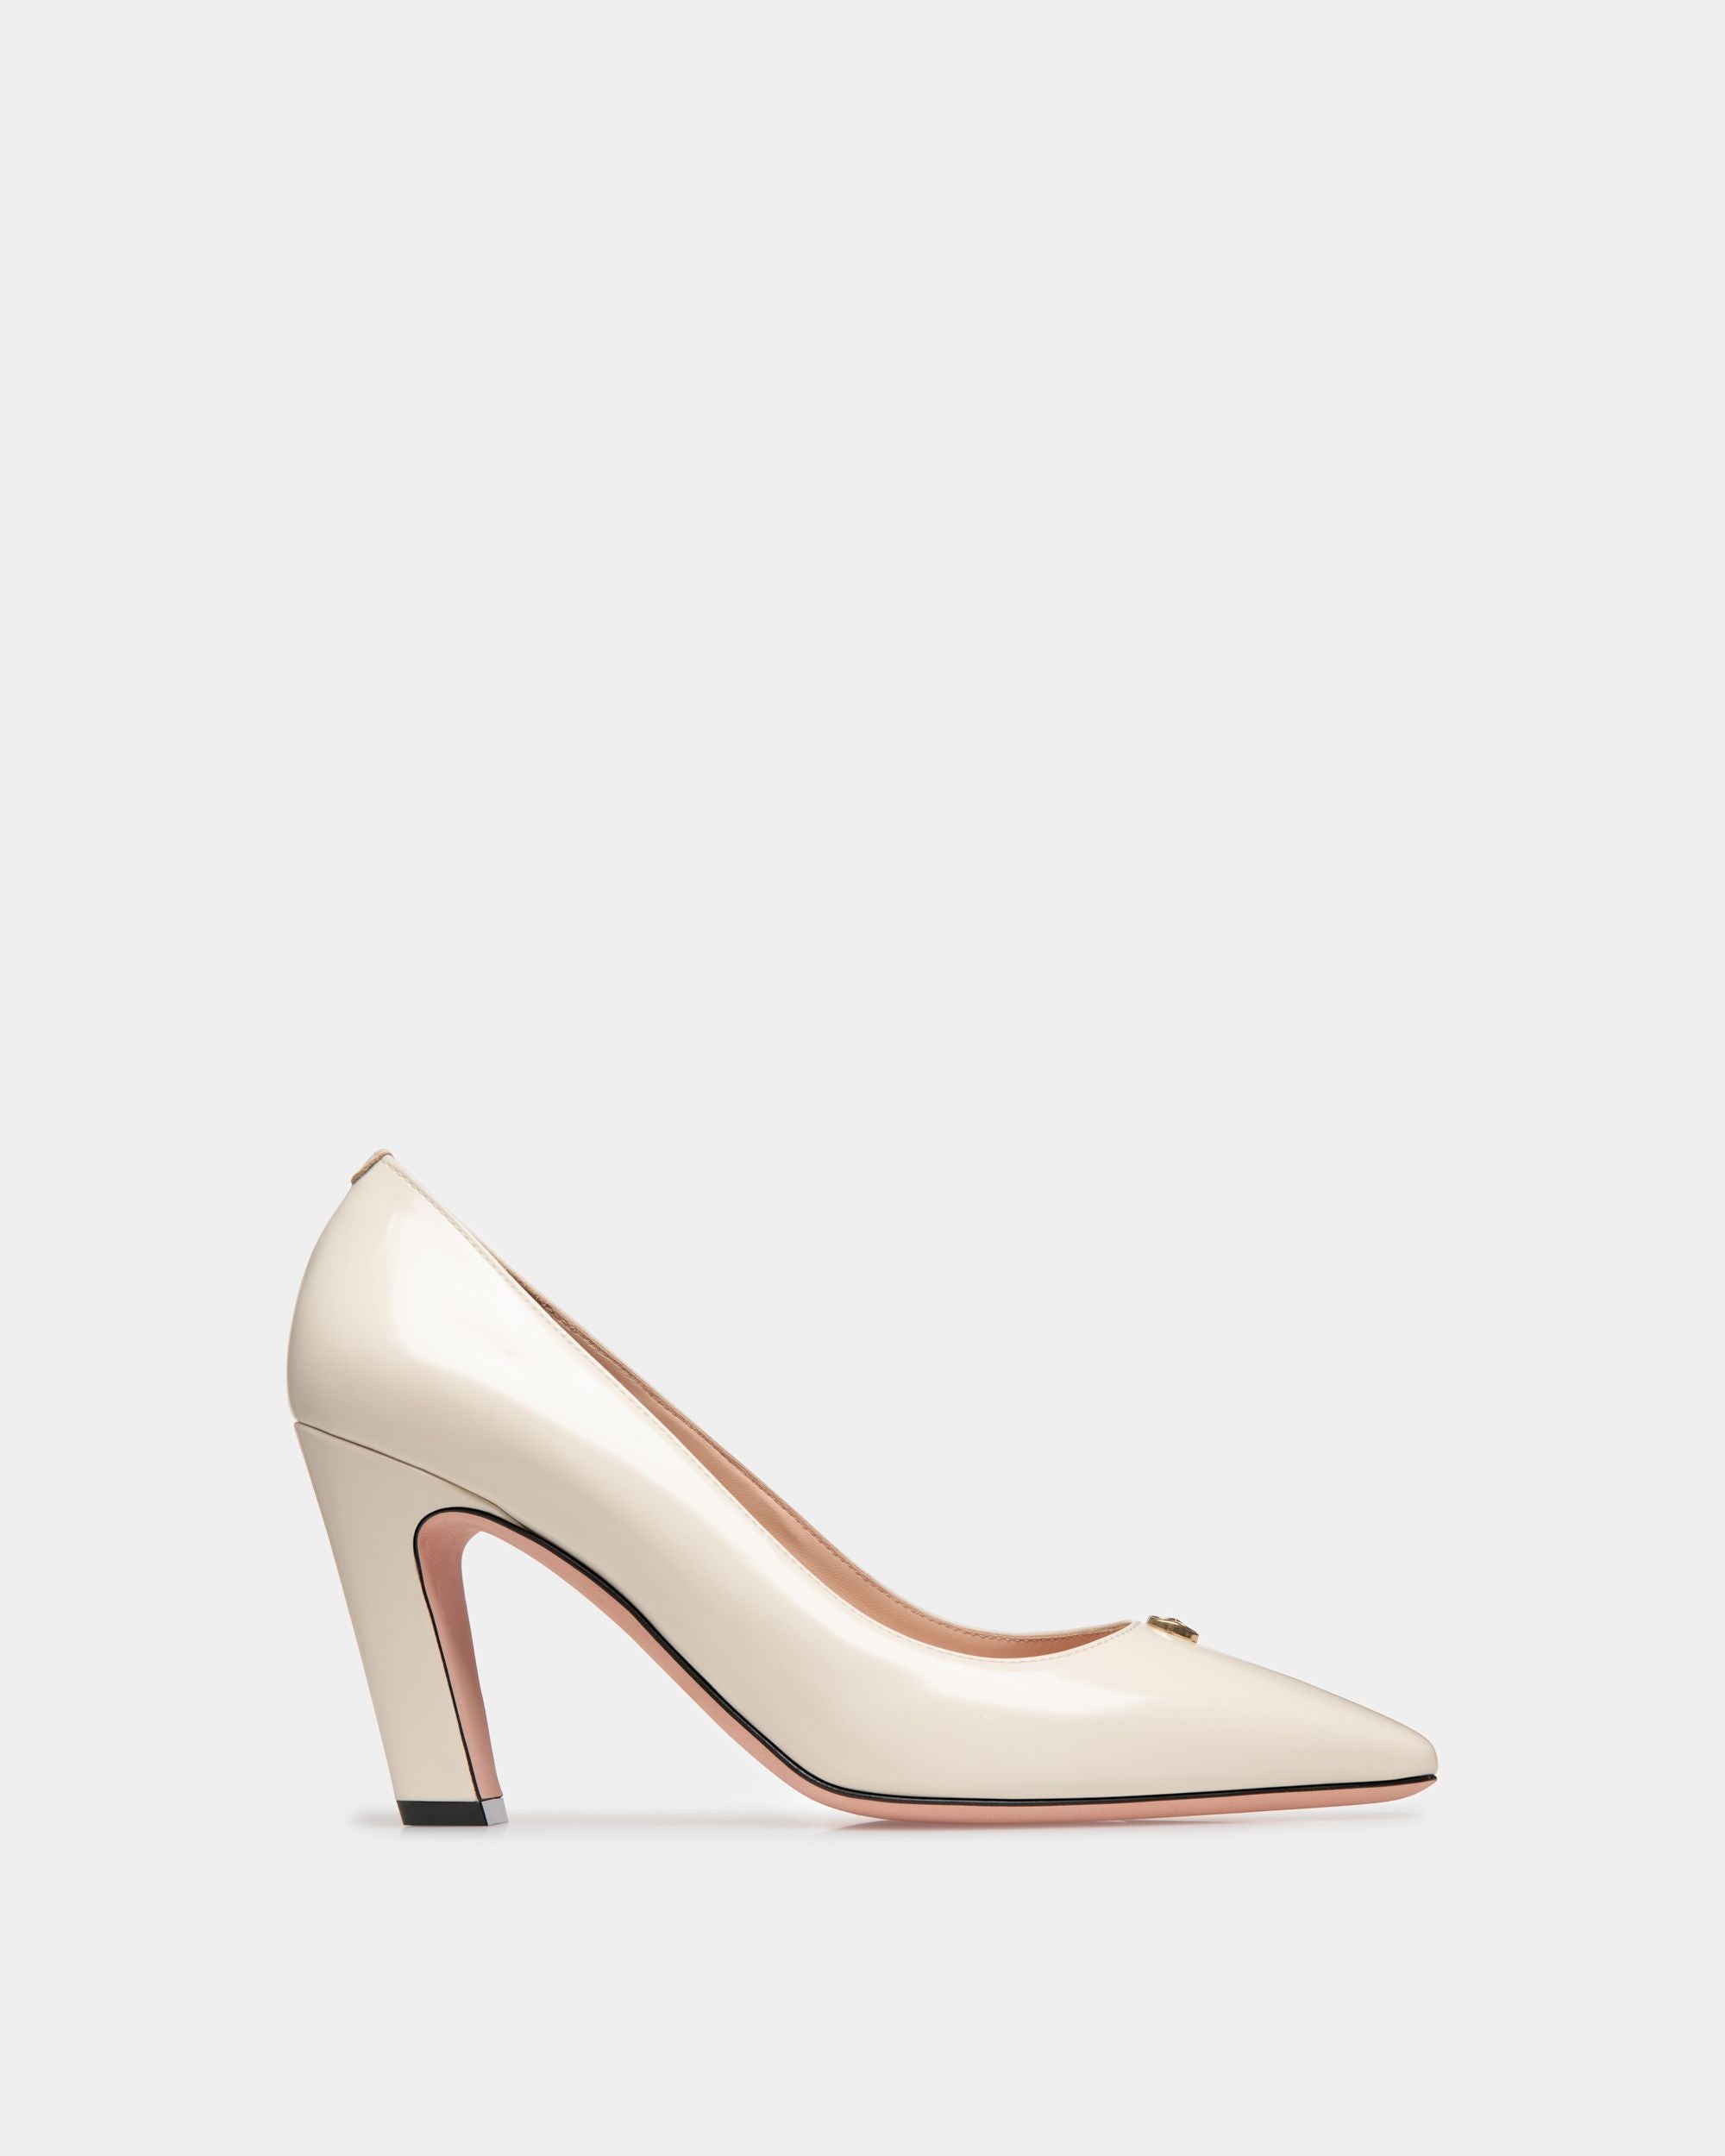 Sylt | Women's Pump in White Leather | Bally | Still Life Side